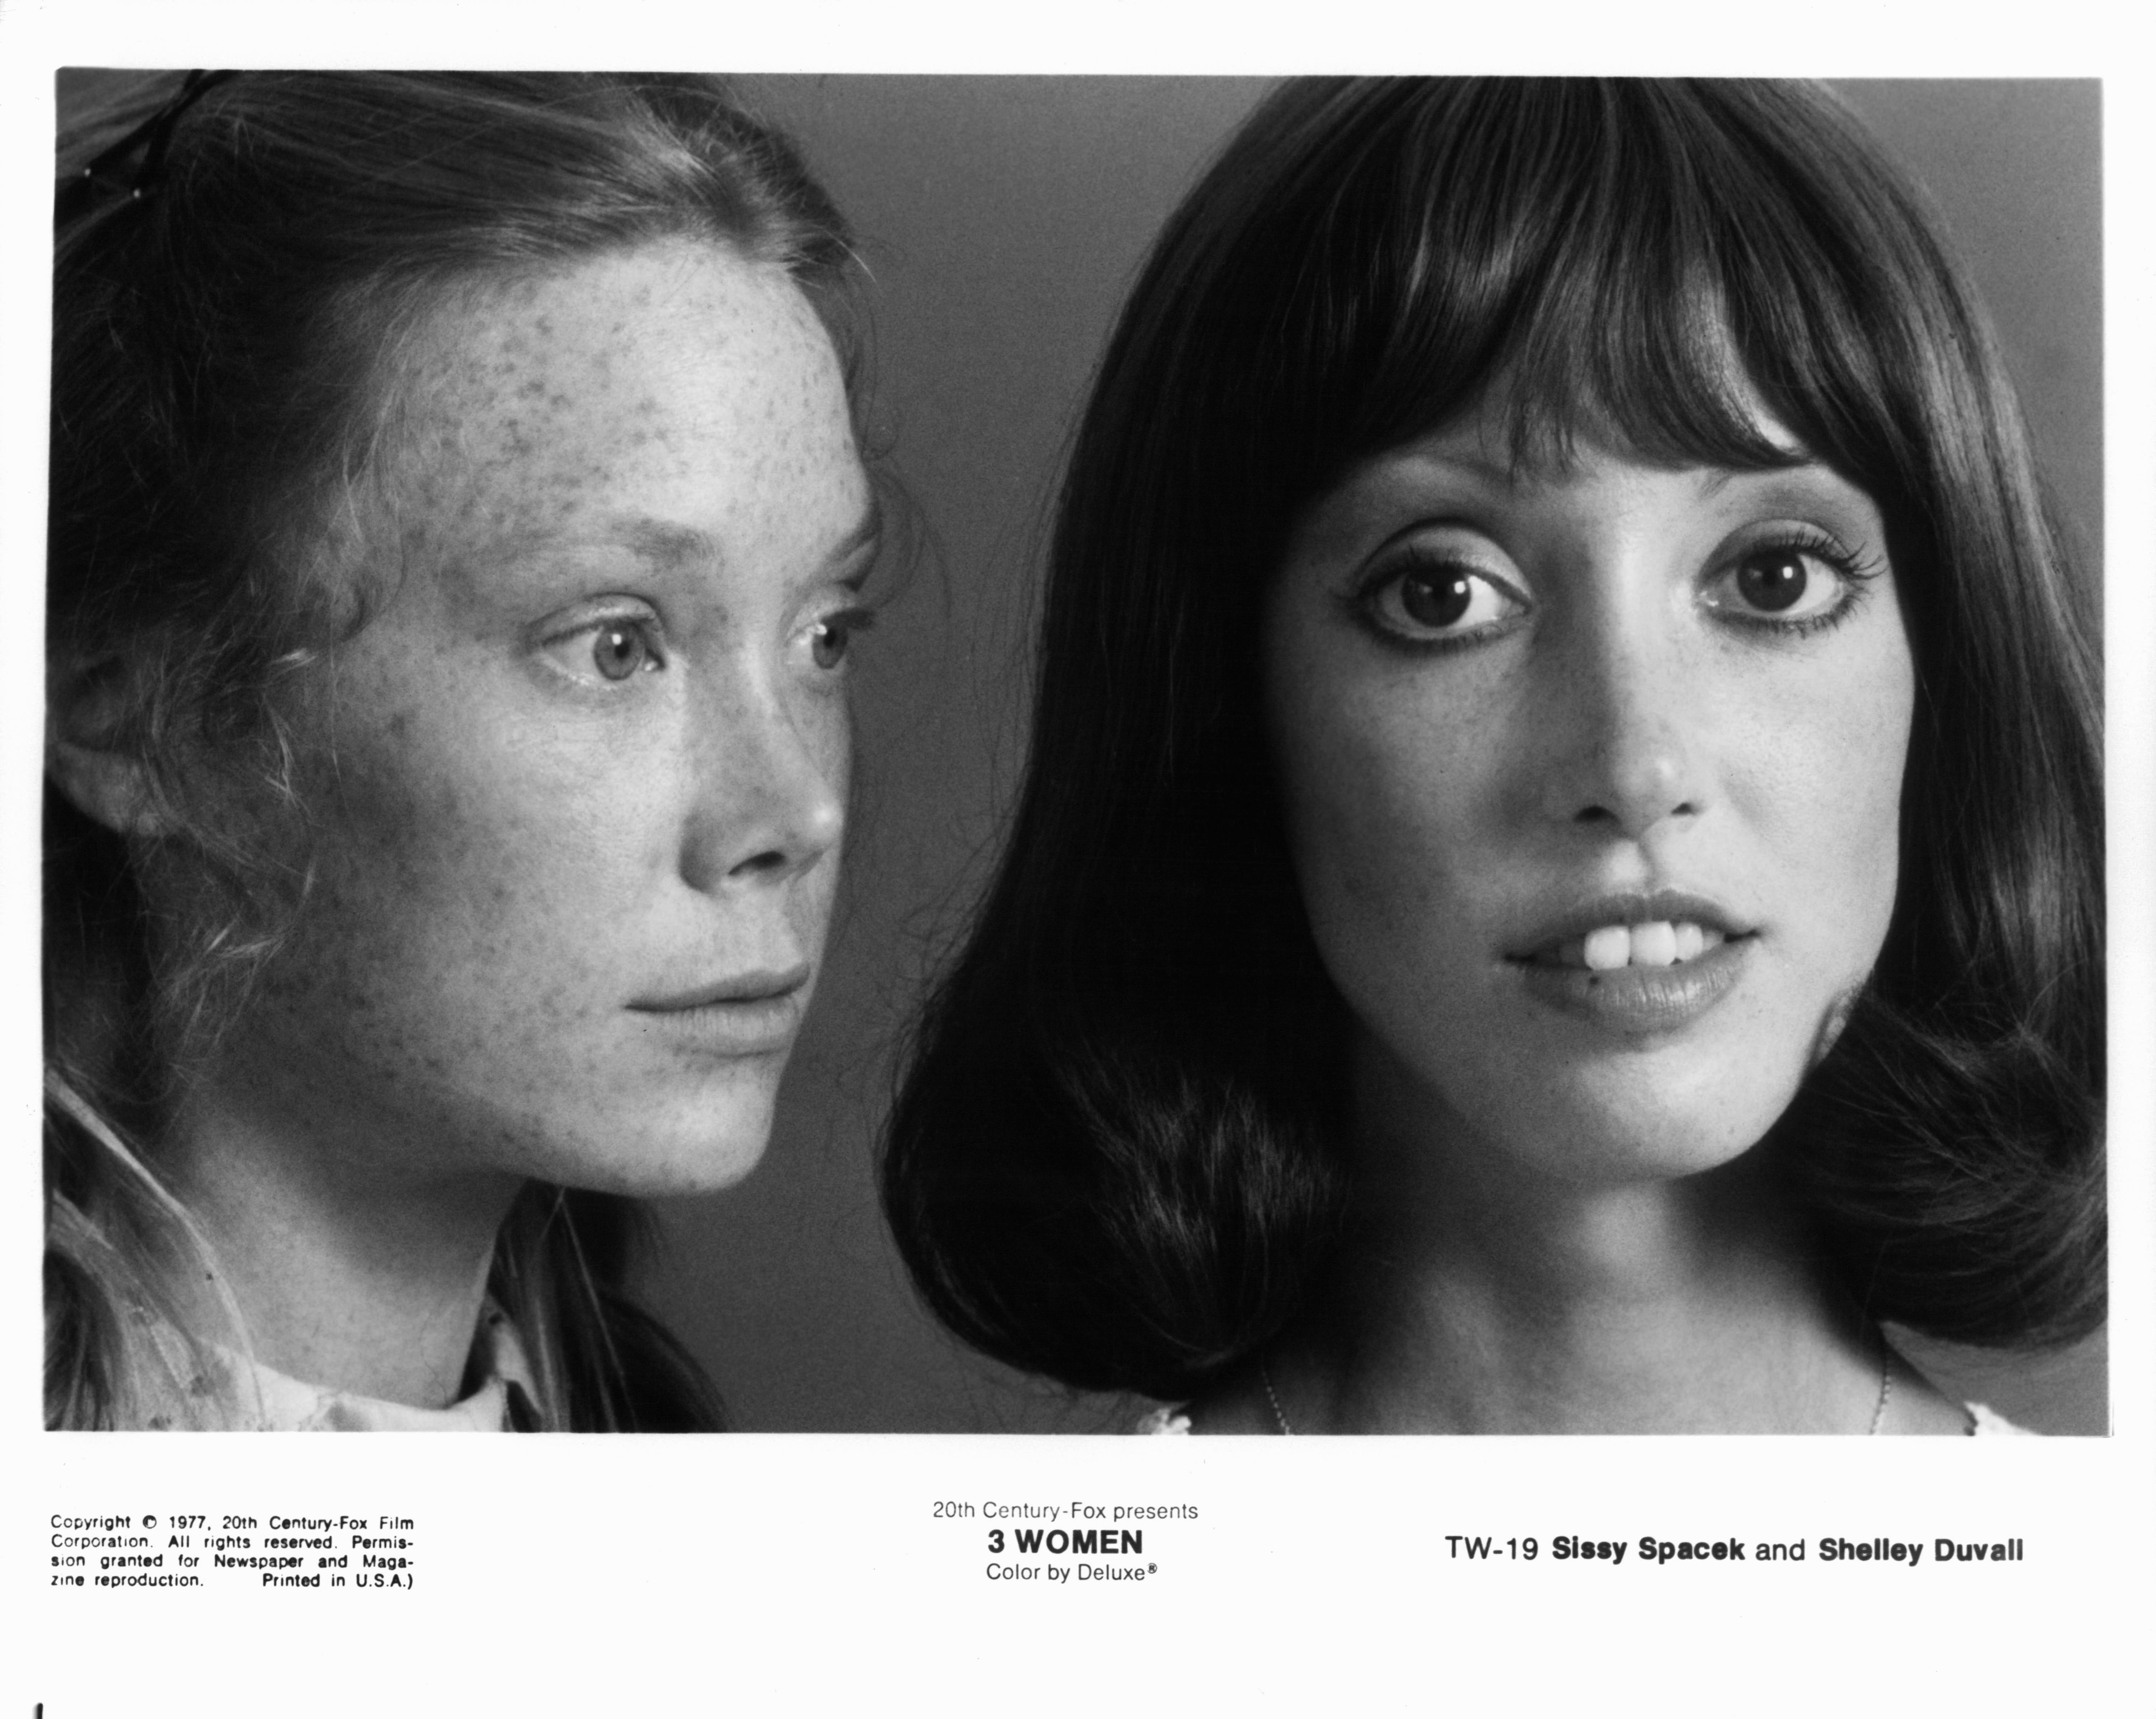 Shelley Long Hardcore Porn - Shelley Duvall: The disappearance and return of a star pushed to her limits  by the film industry | Culture | EL PAÃS English